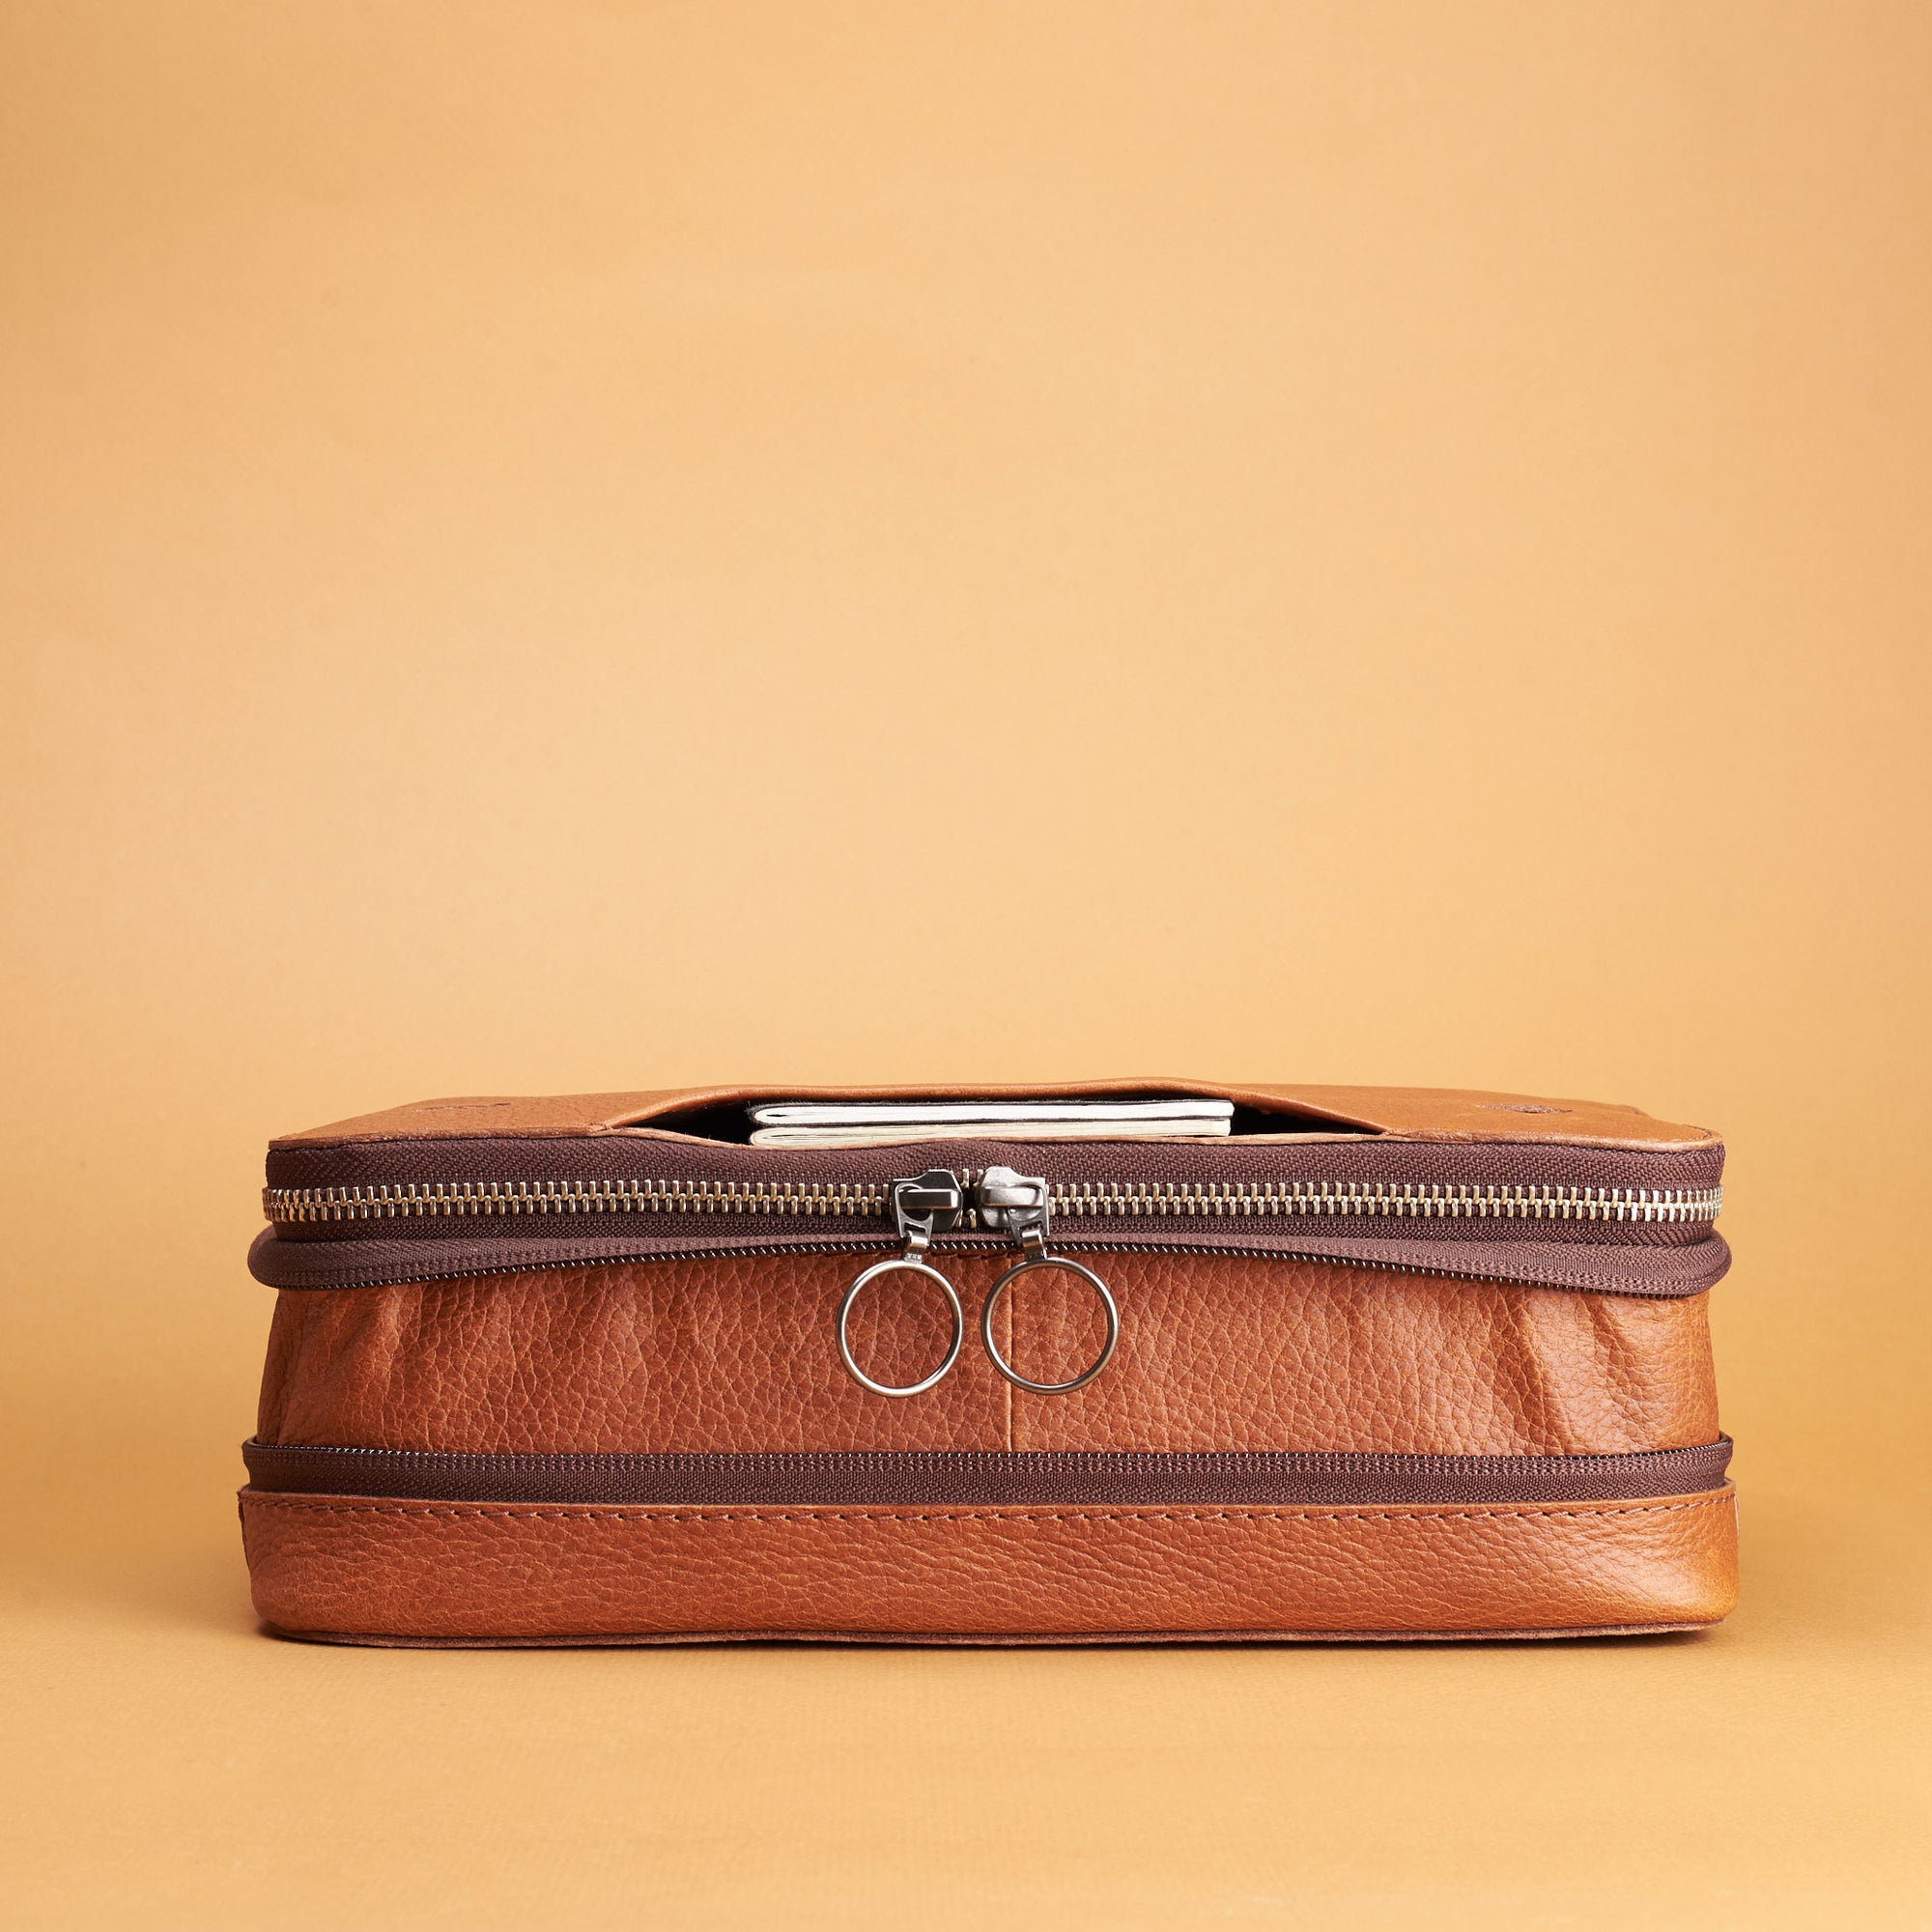 Expansion and compression system. Tan small EDC gear bag by Capra Leather